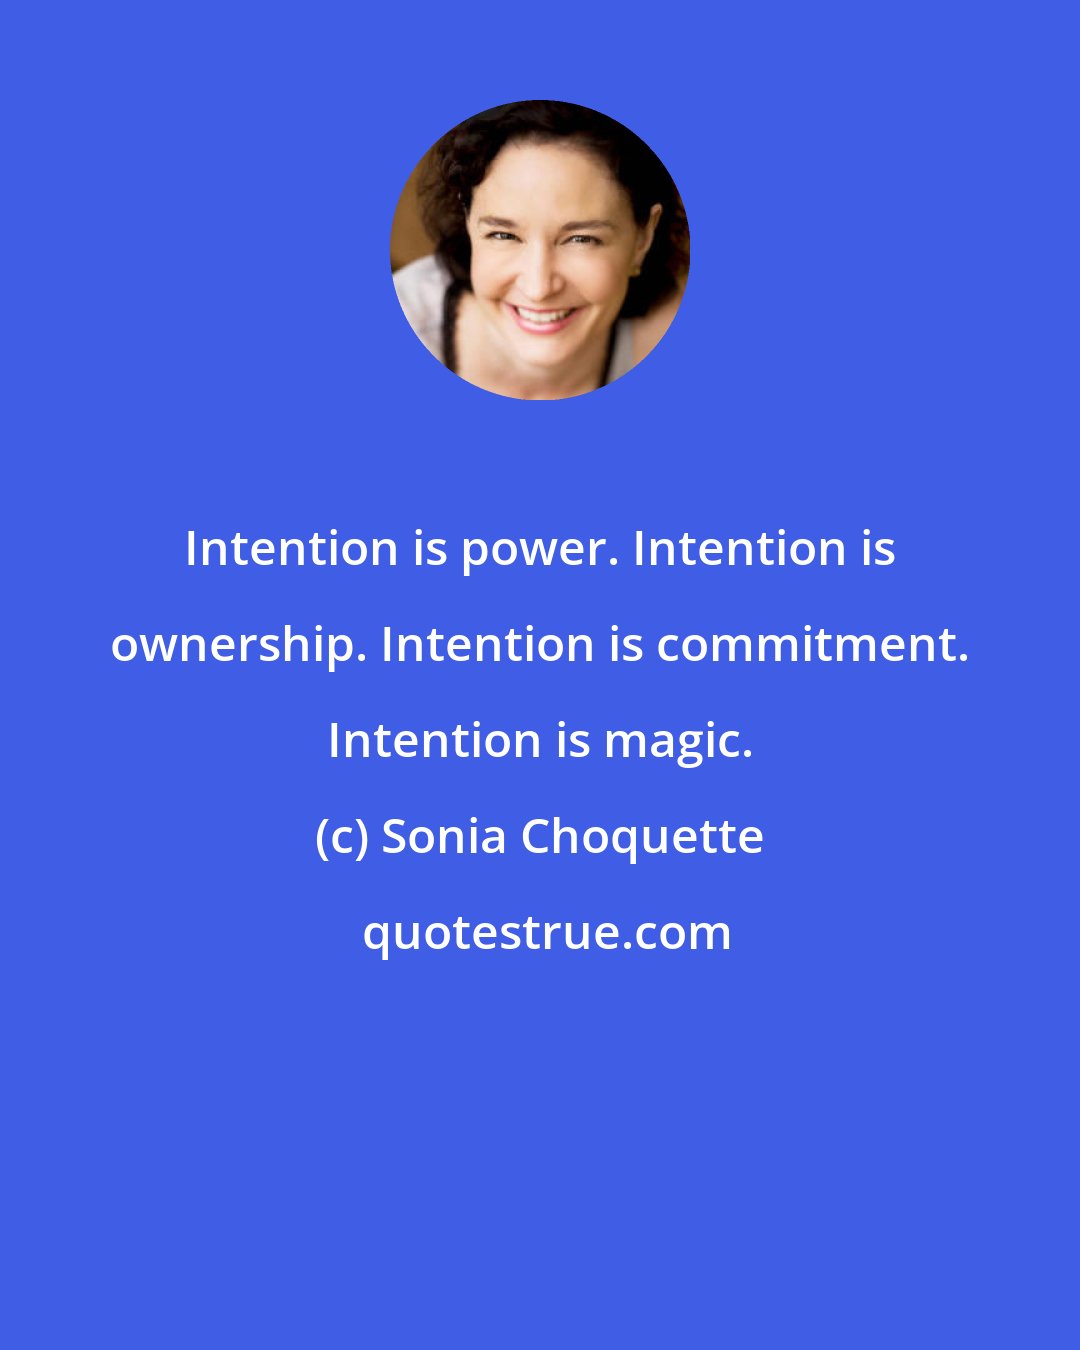 Sonia Choquette: Intention is power. Intention is ownership. Intention is commitment. Intention is magic.